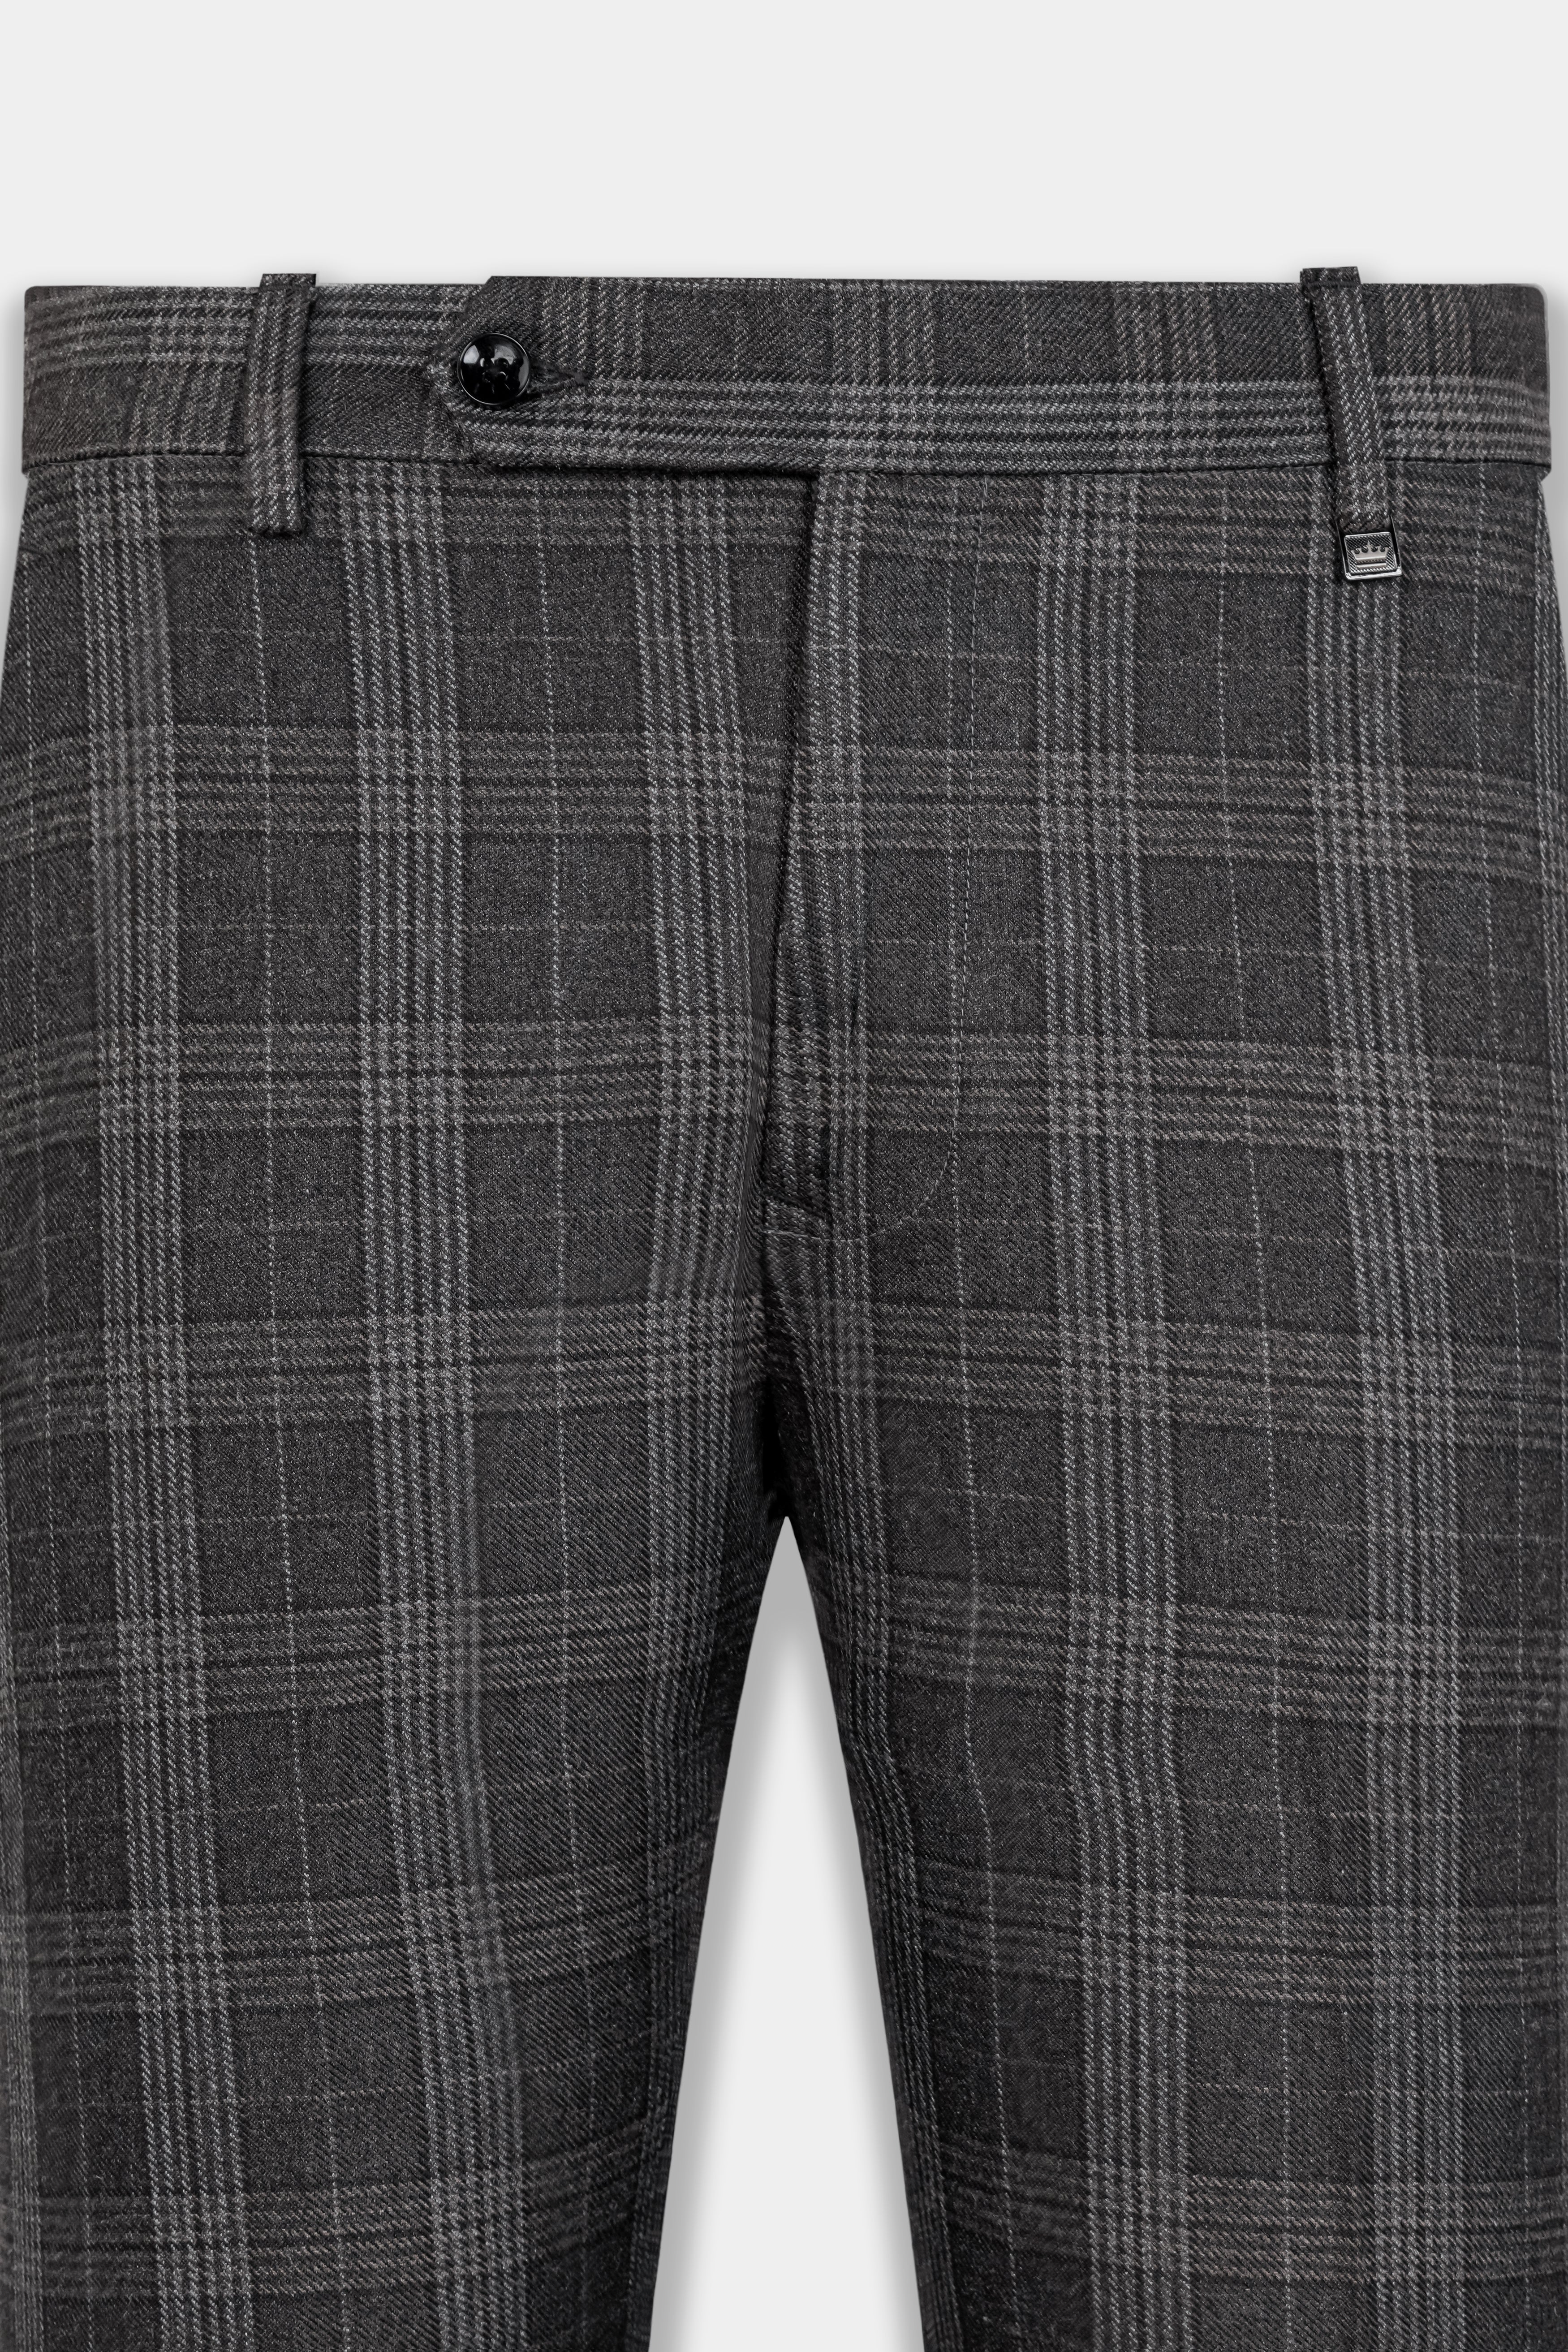 Shop Business Casual Pants for Men in India - Available in Plain, Checks  and Stripes Pattern